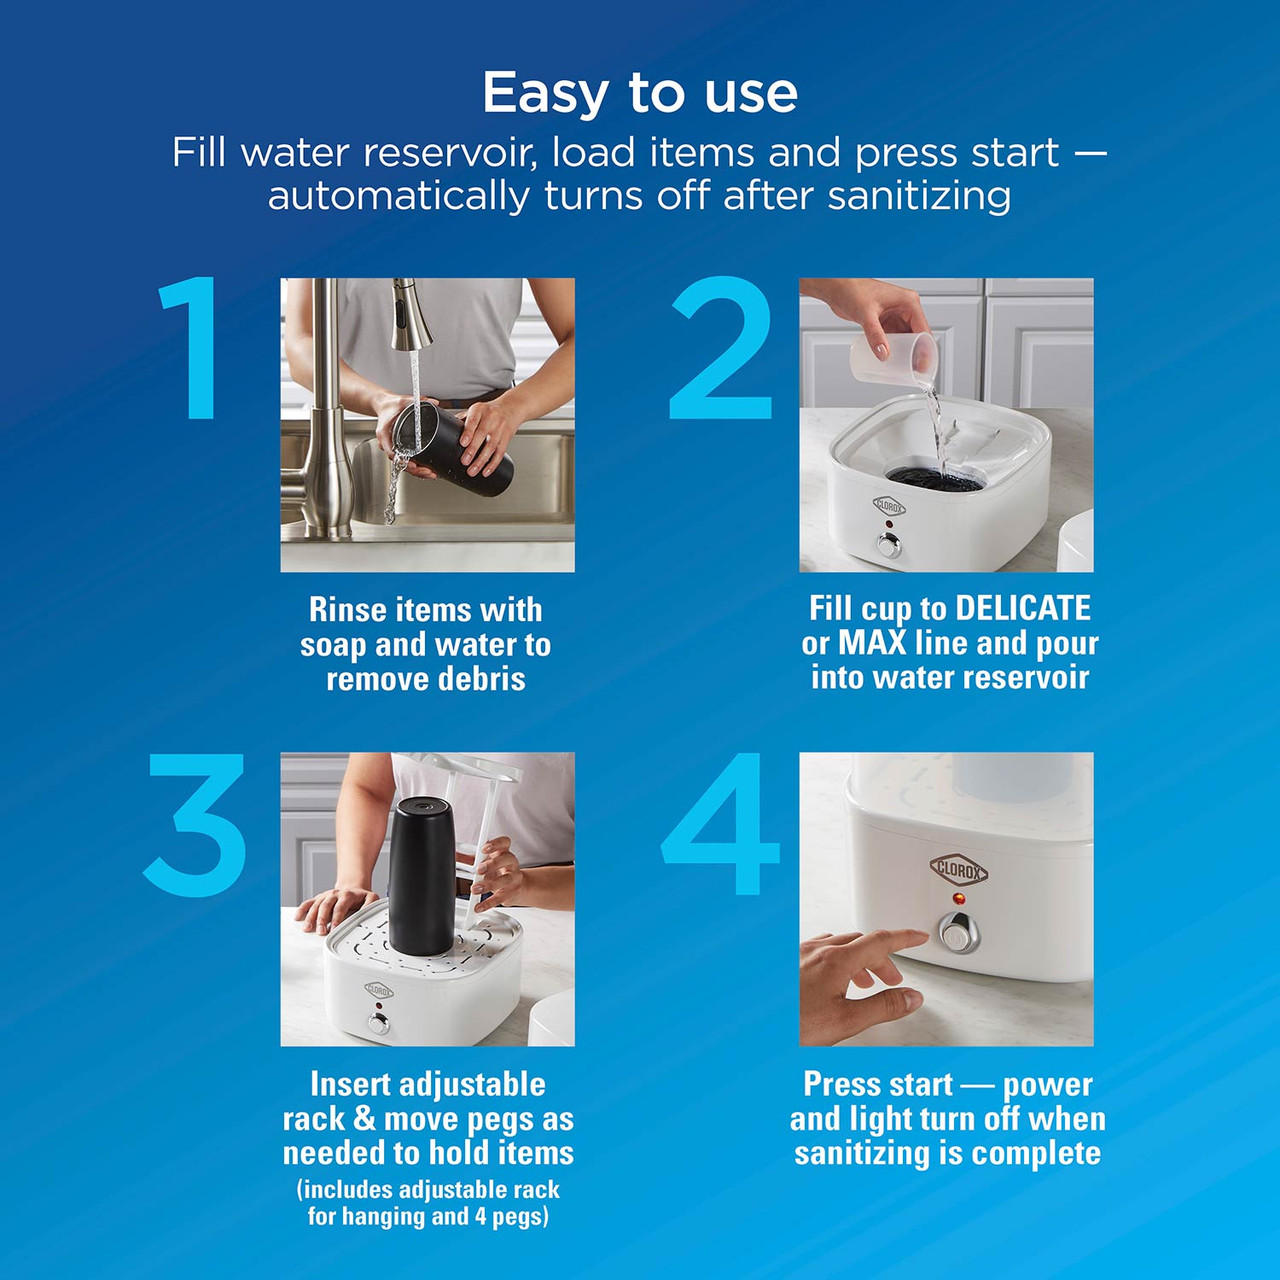 Easy to use, fill water reservoir, load items and press start - automatically turns off after sanitizing